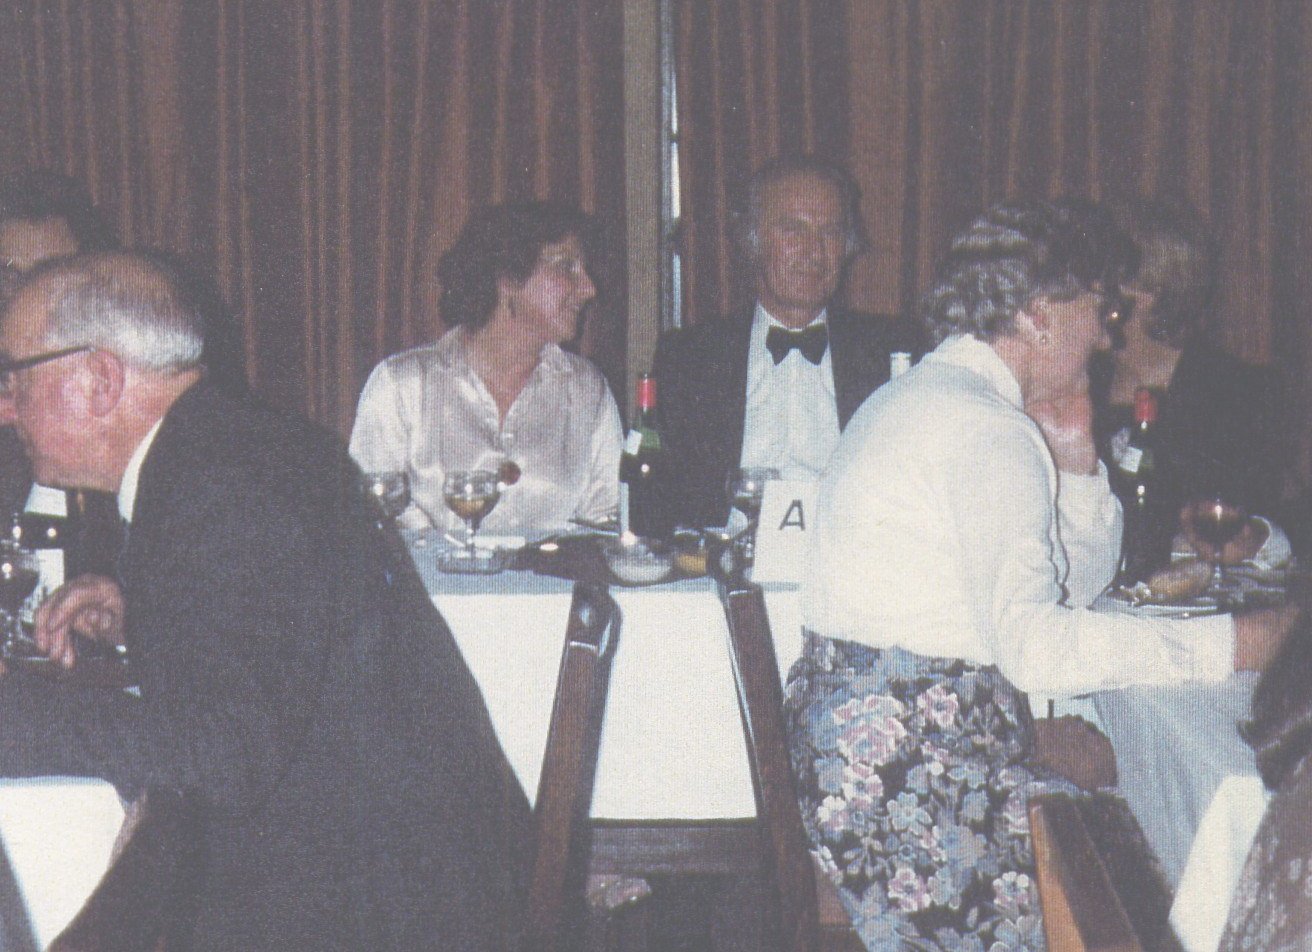 Norman Whyte at the 25th anniversary dinner